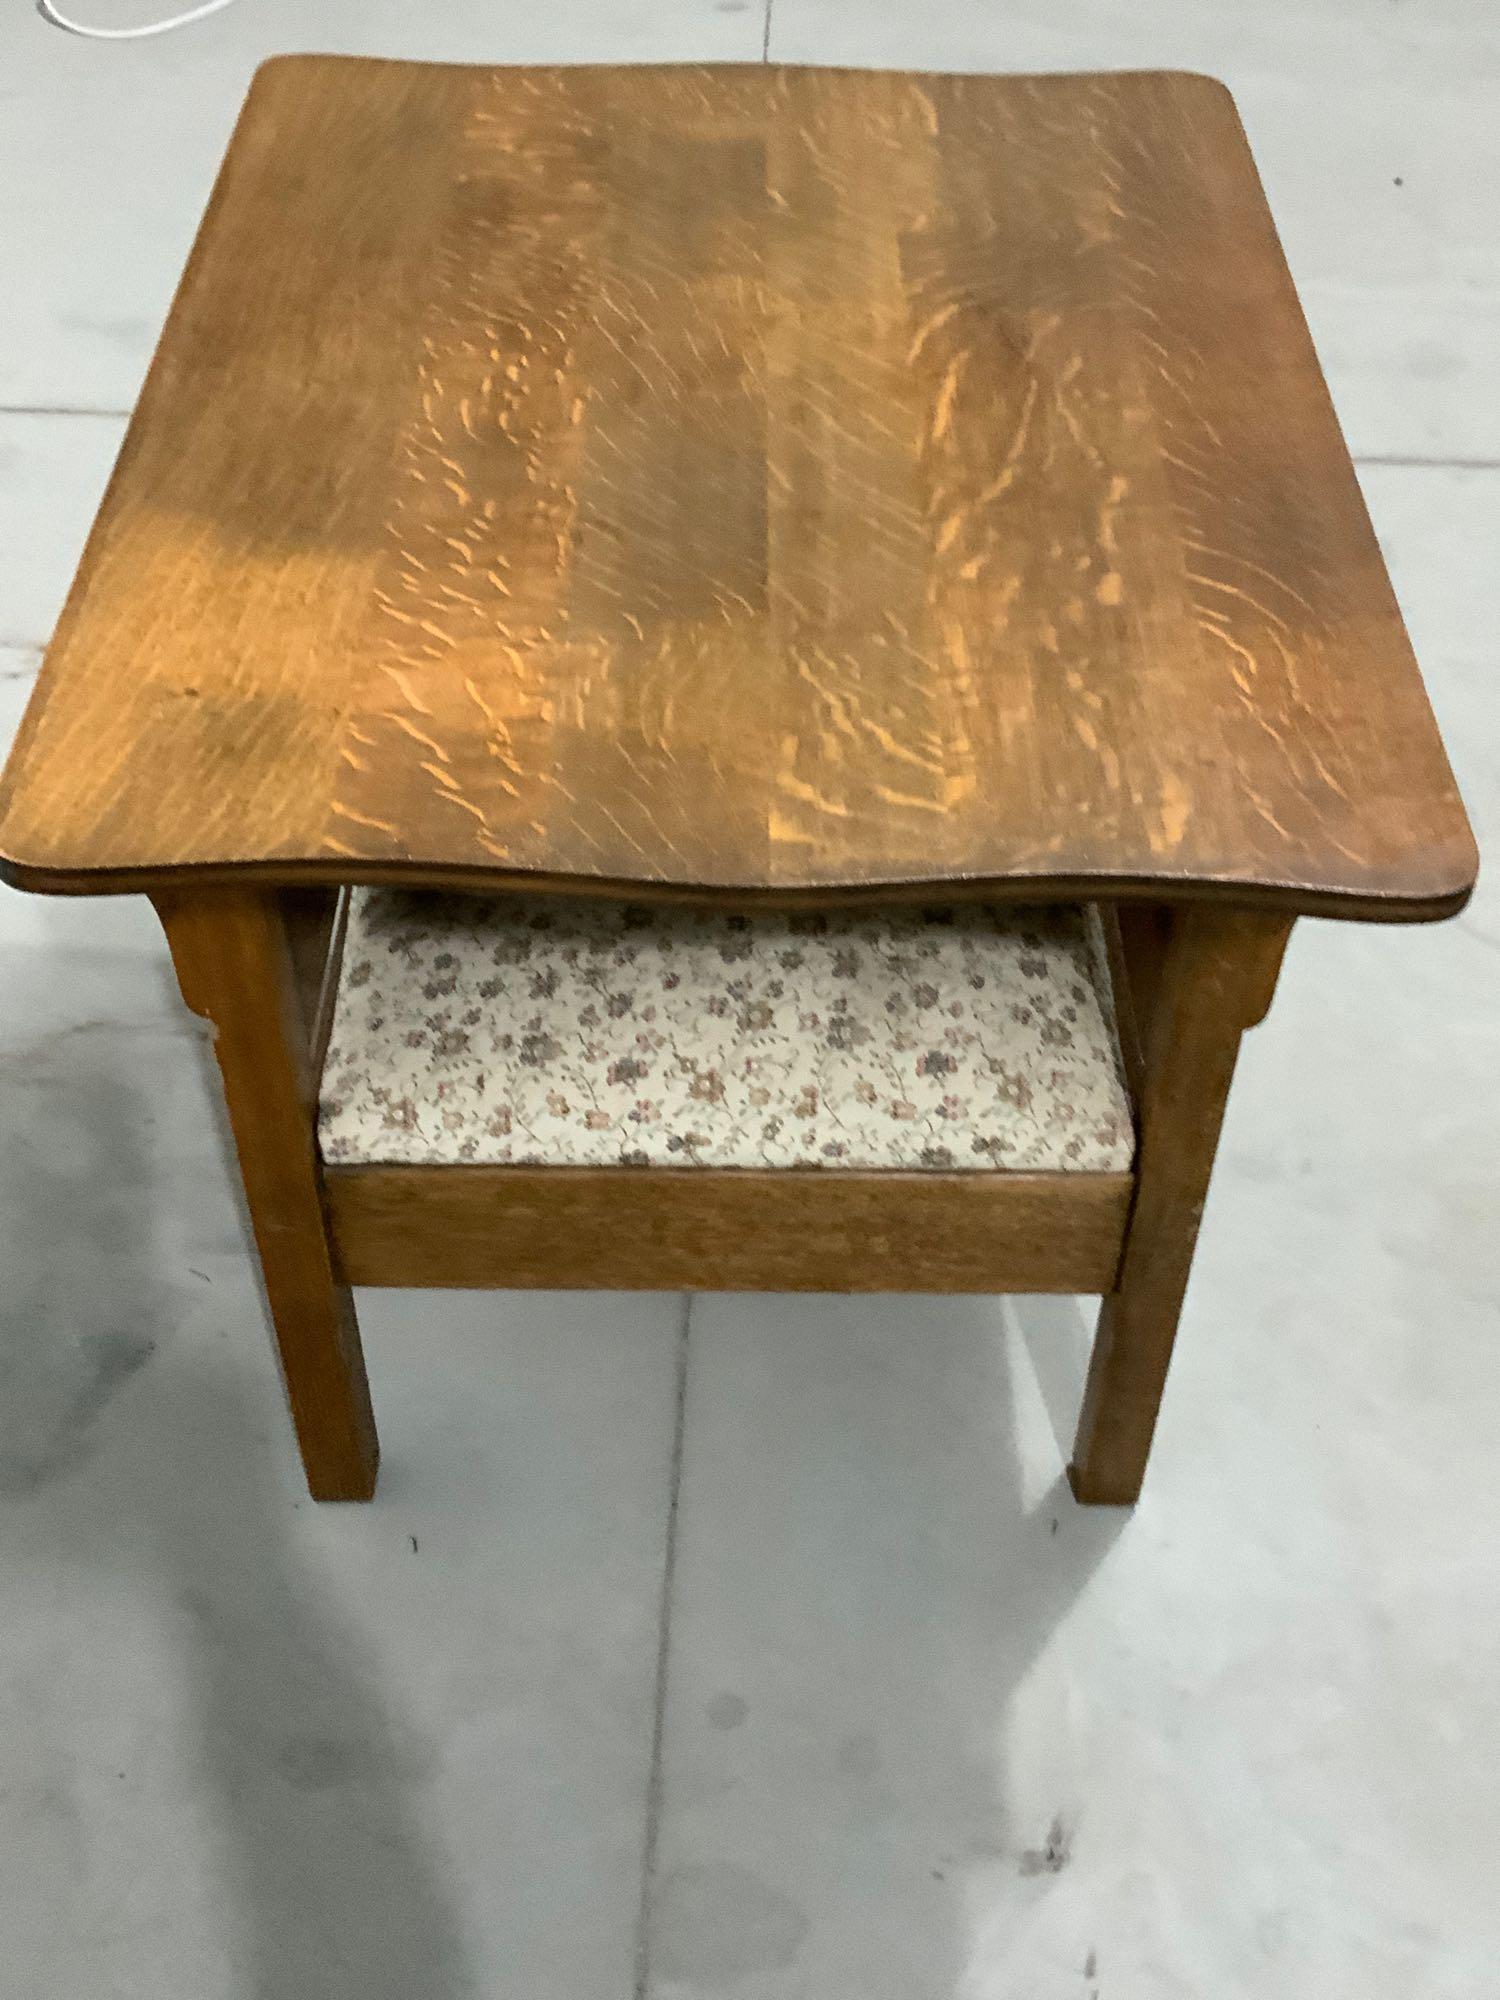 MISSION OAK TABLE CHAIR WITH DRAWER